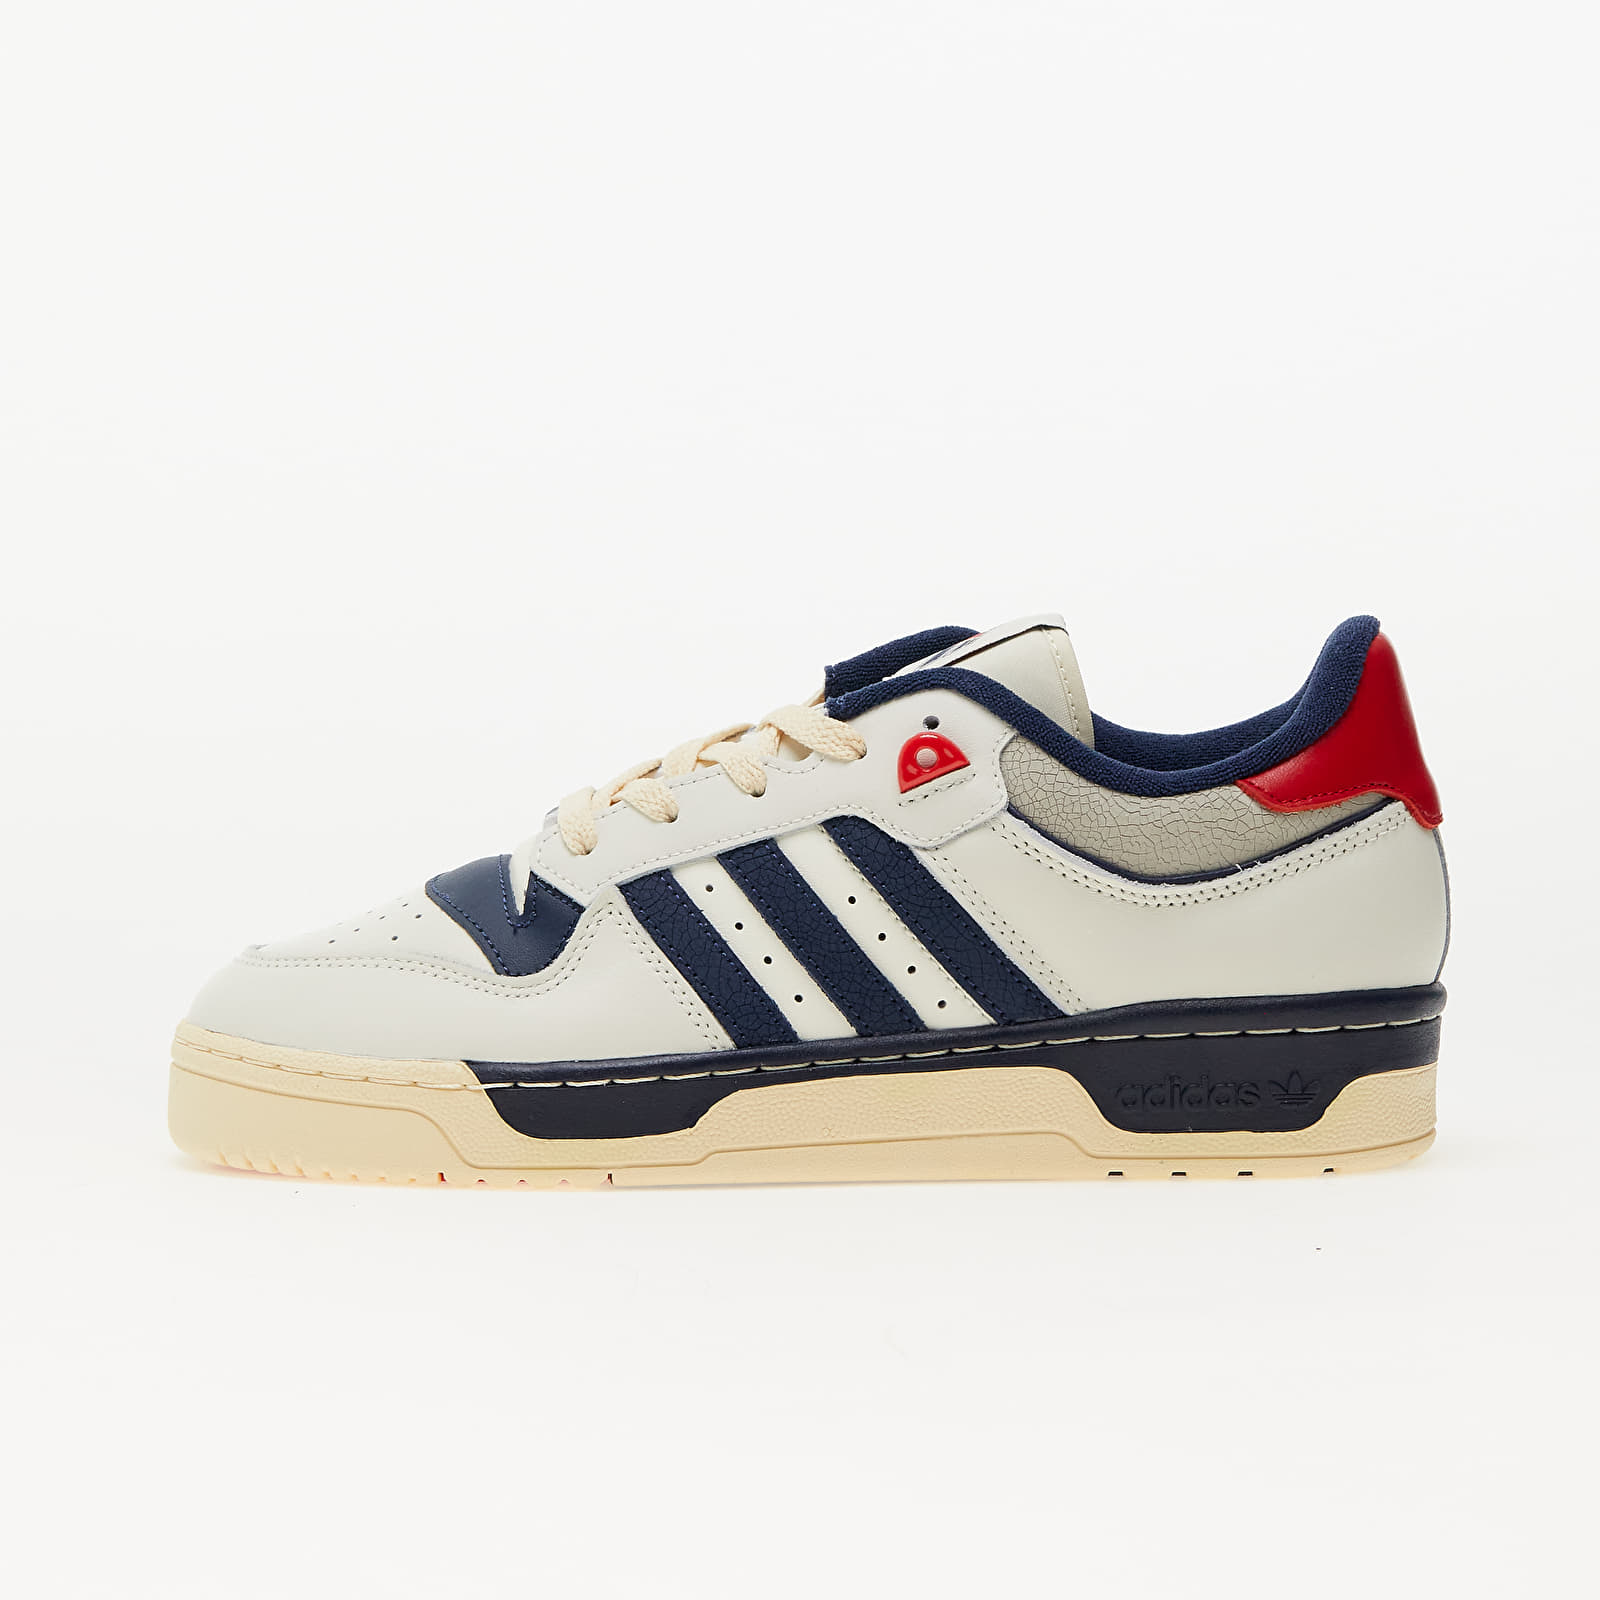 Men's shoes adidas Rivalry 86 Low Ivory/ Night Indigo/ Better Scarlet